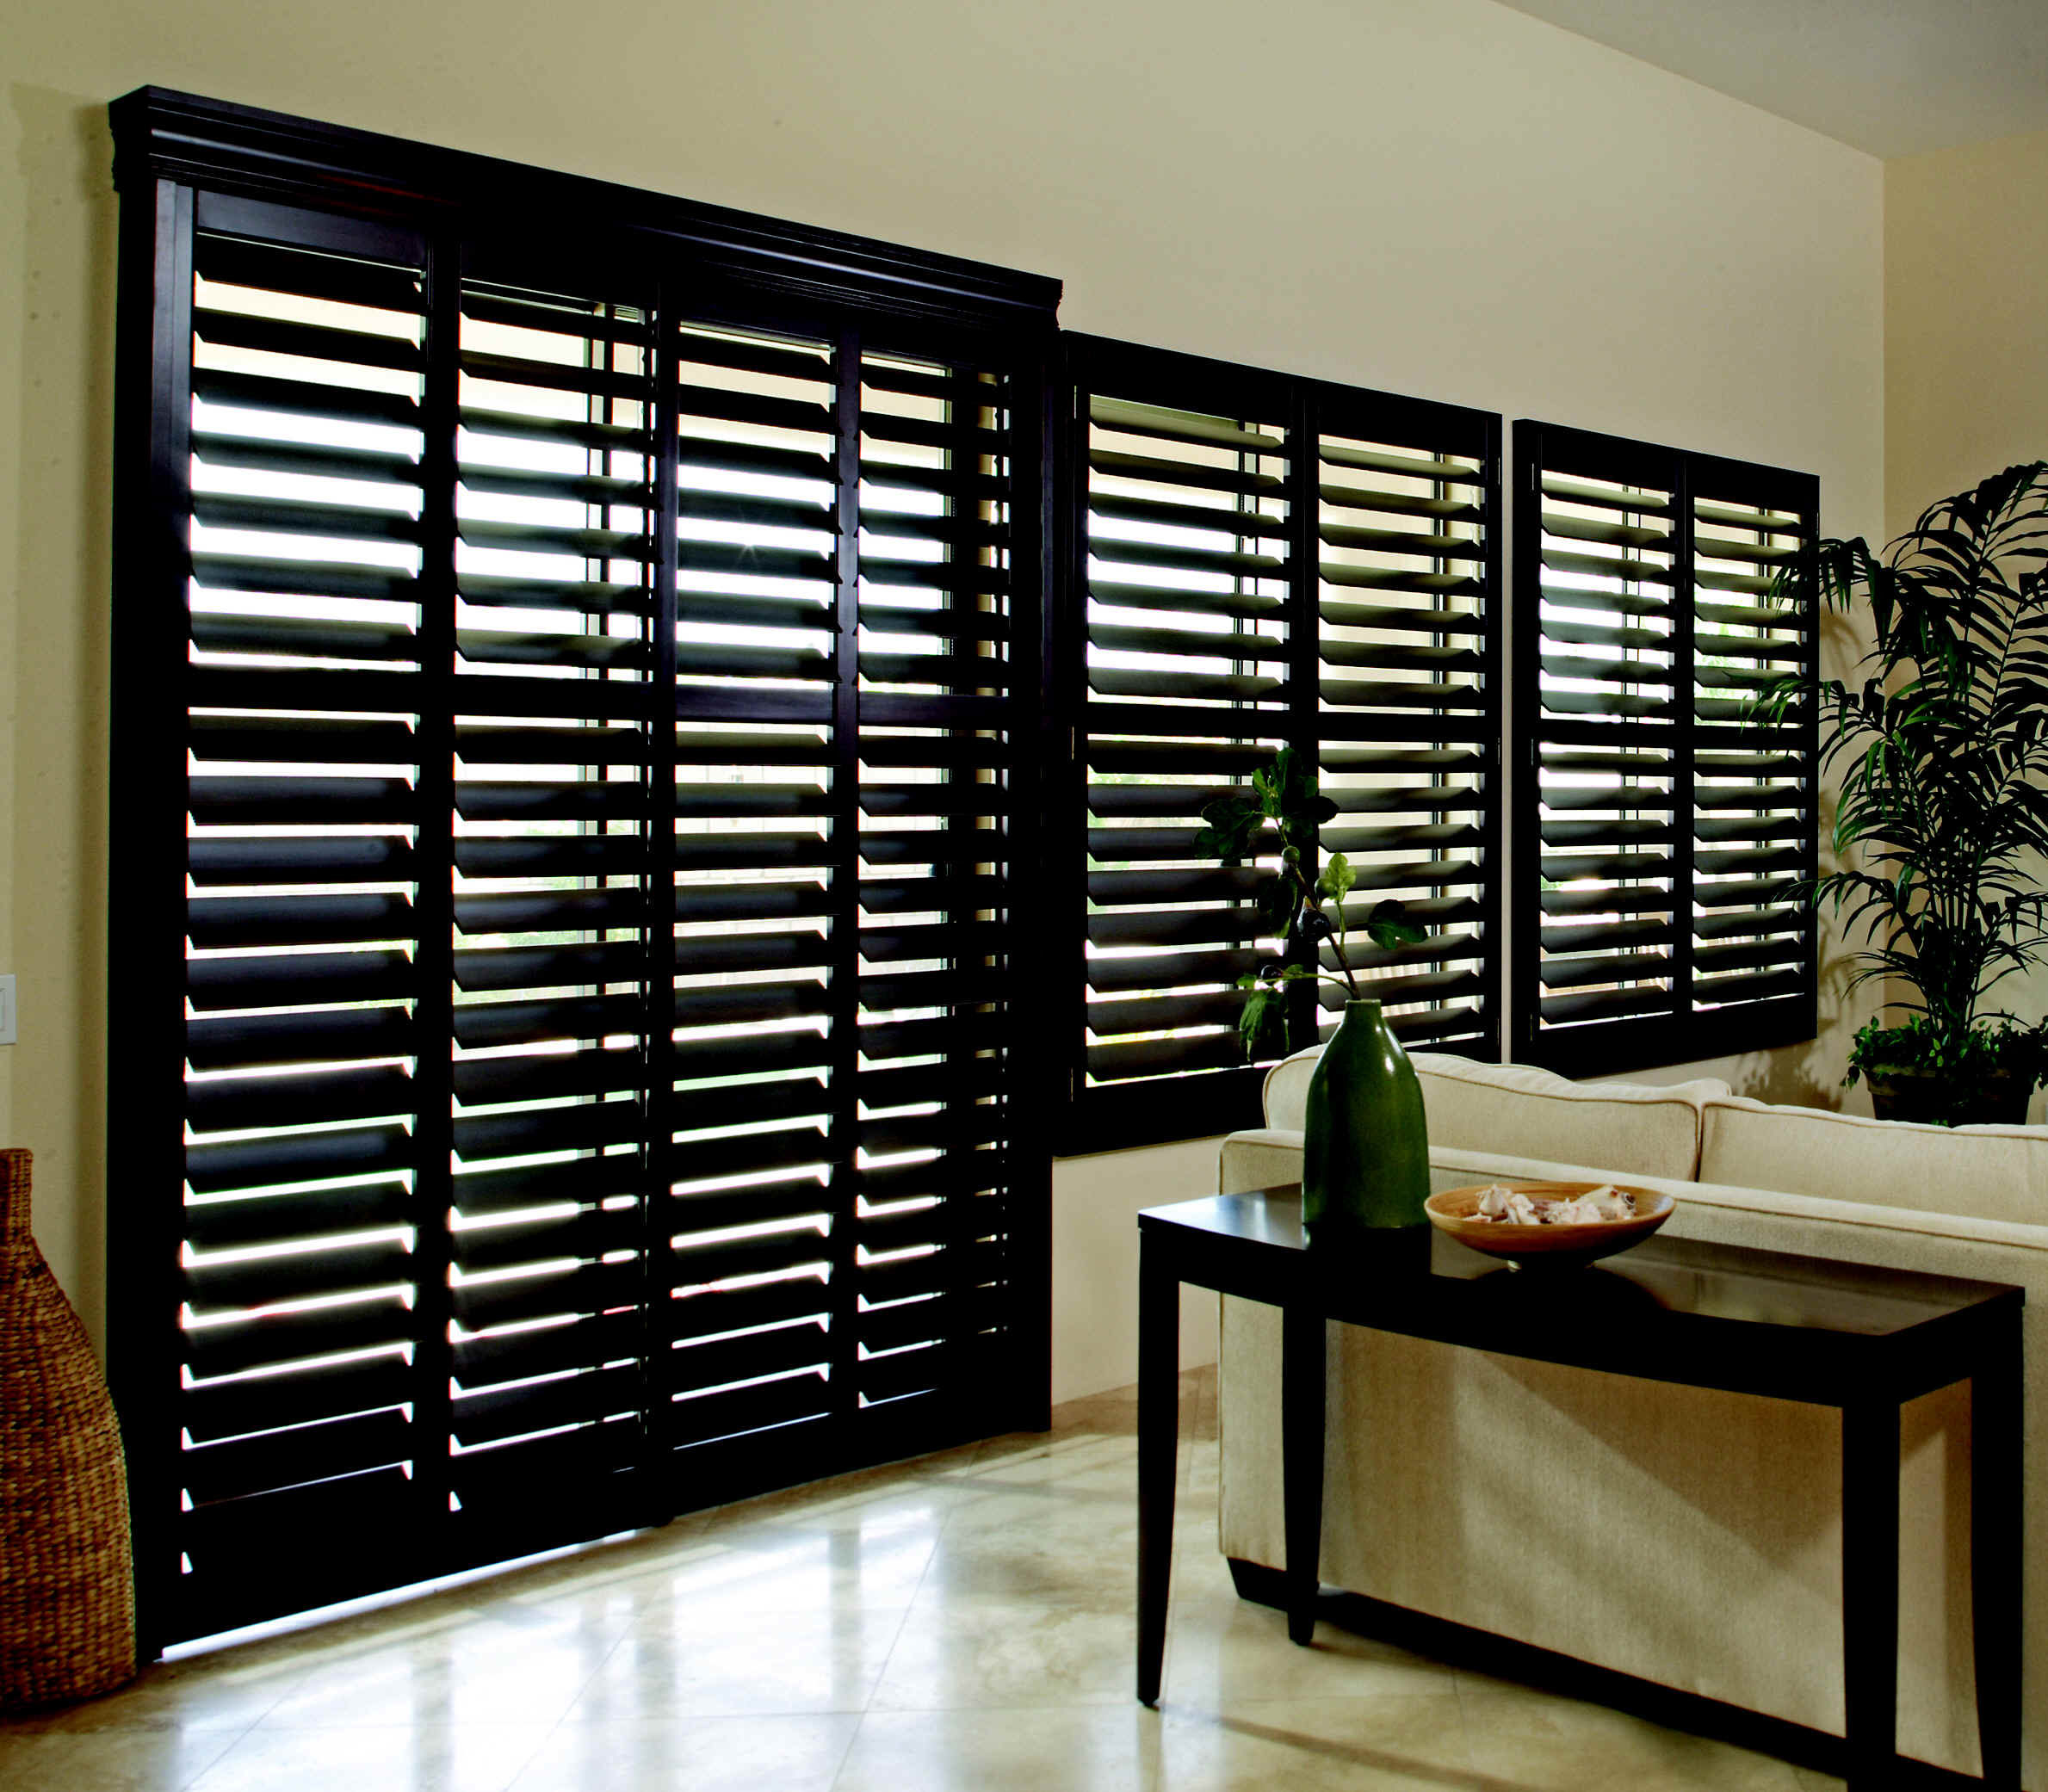 Clearview Shutters For Sale At Low Prices in Melrose